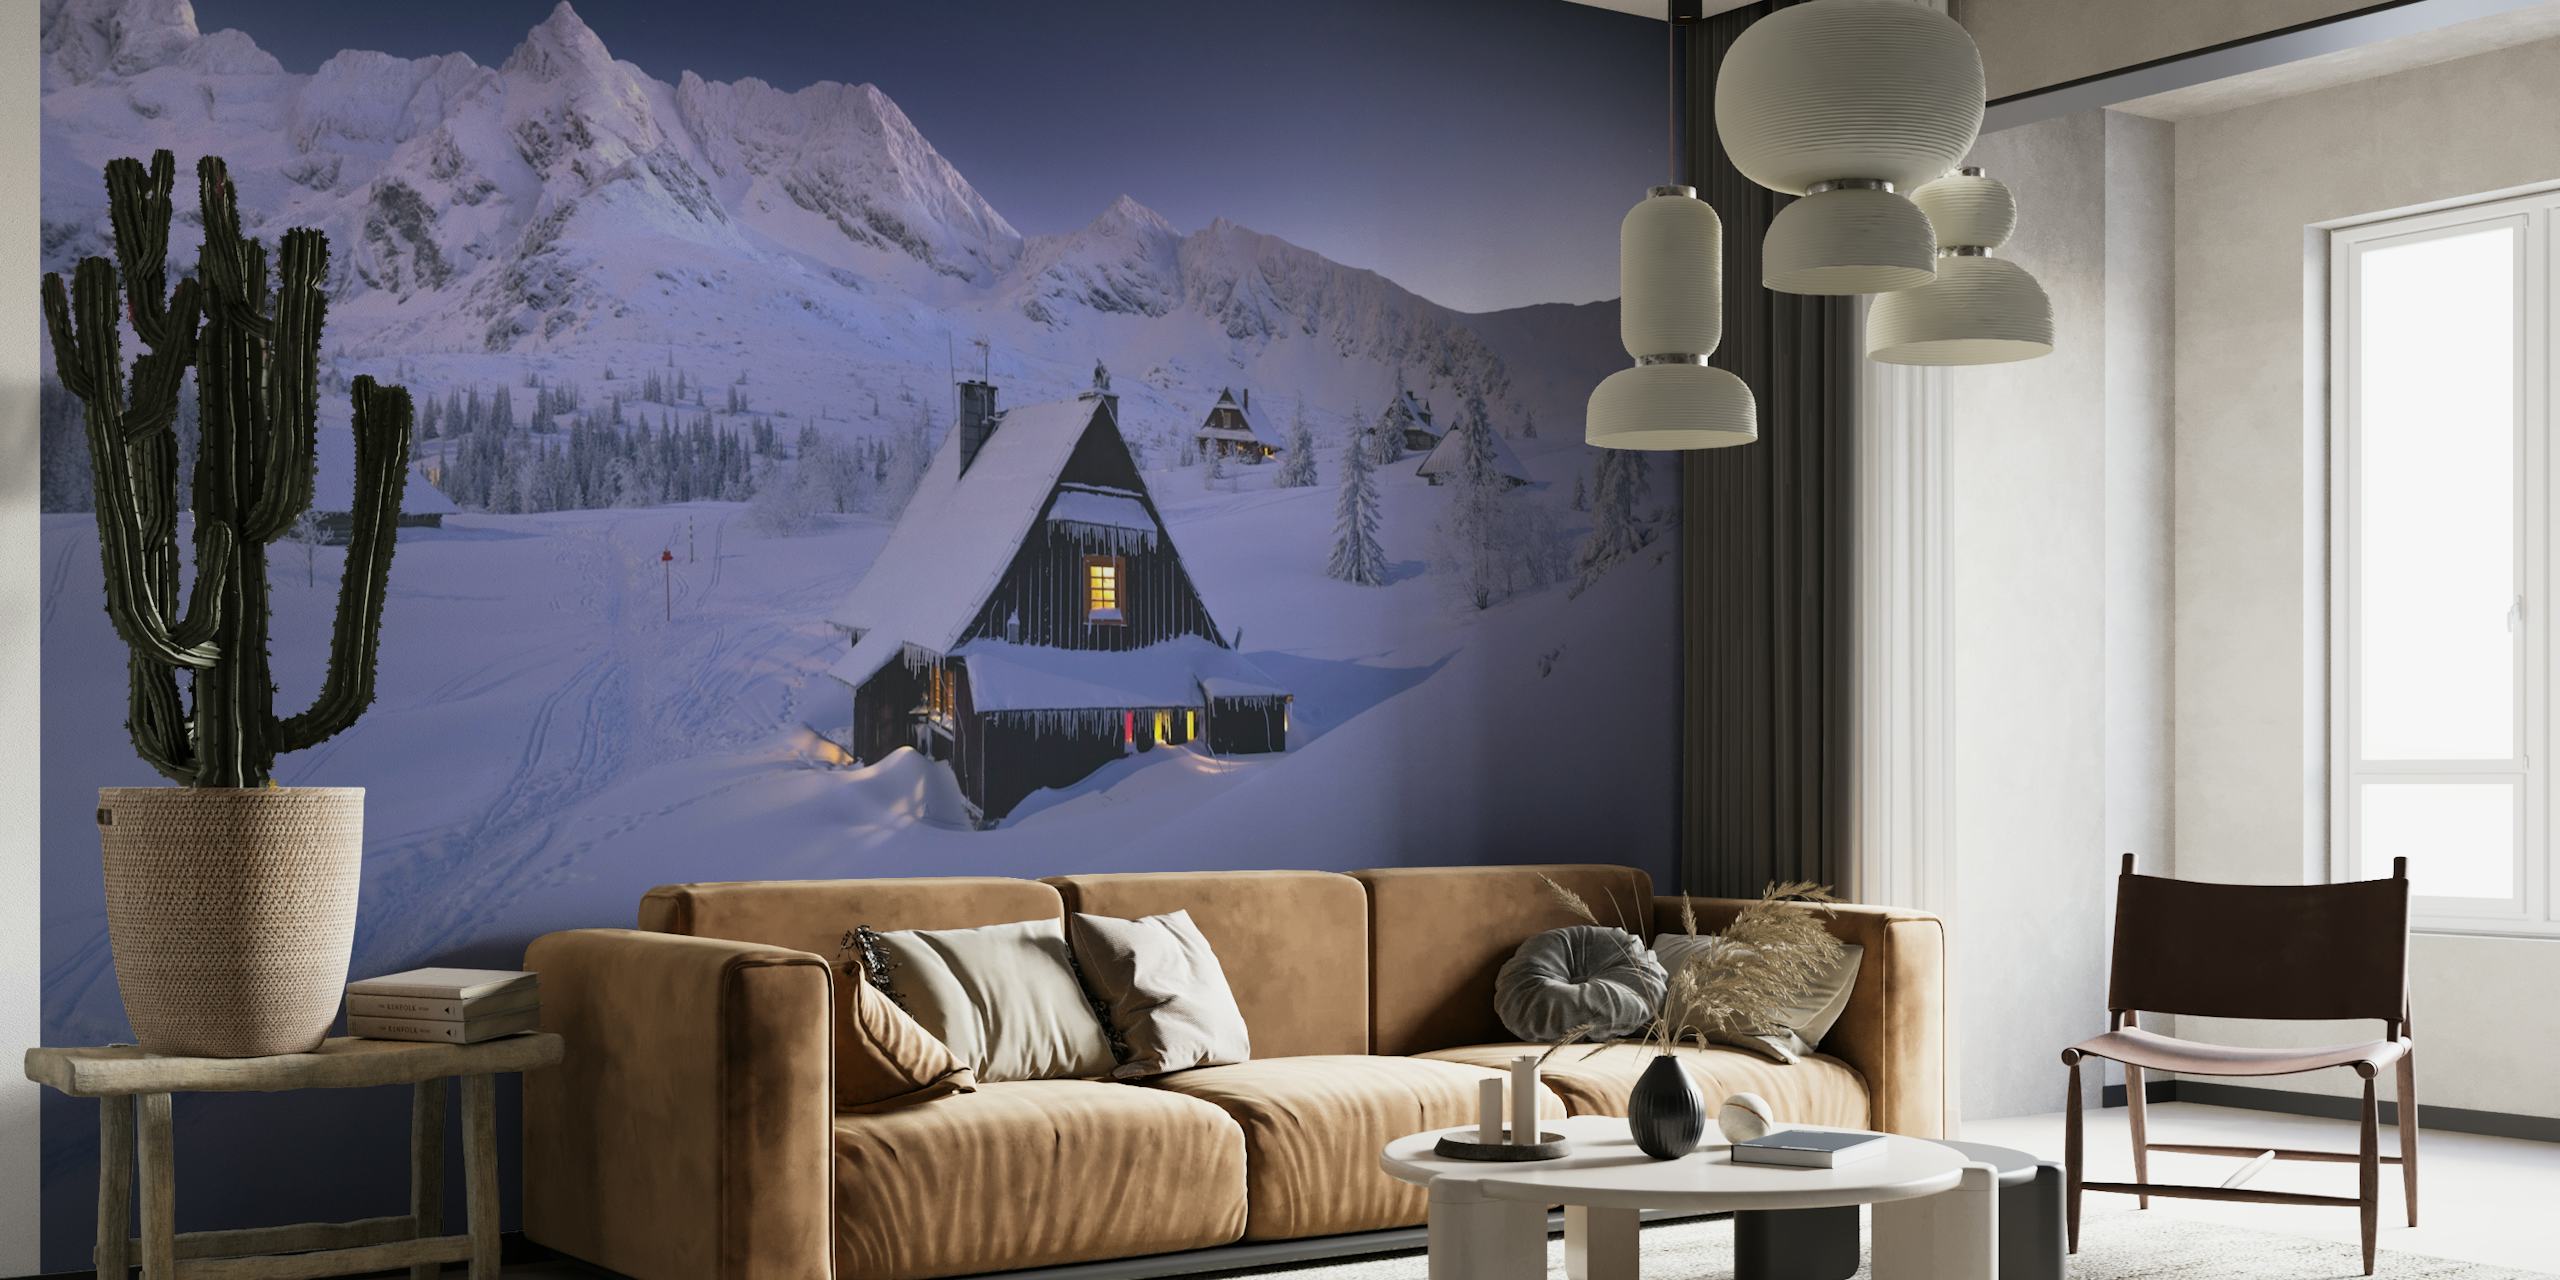 Cozy winter cabin wall mural surrounded by pristine snow and twilight sky